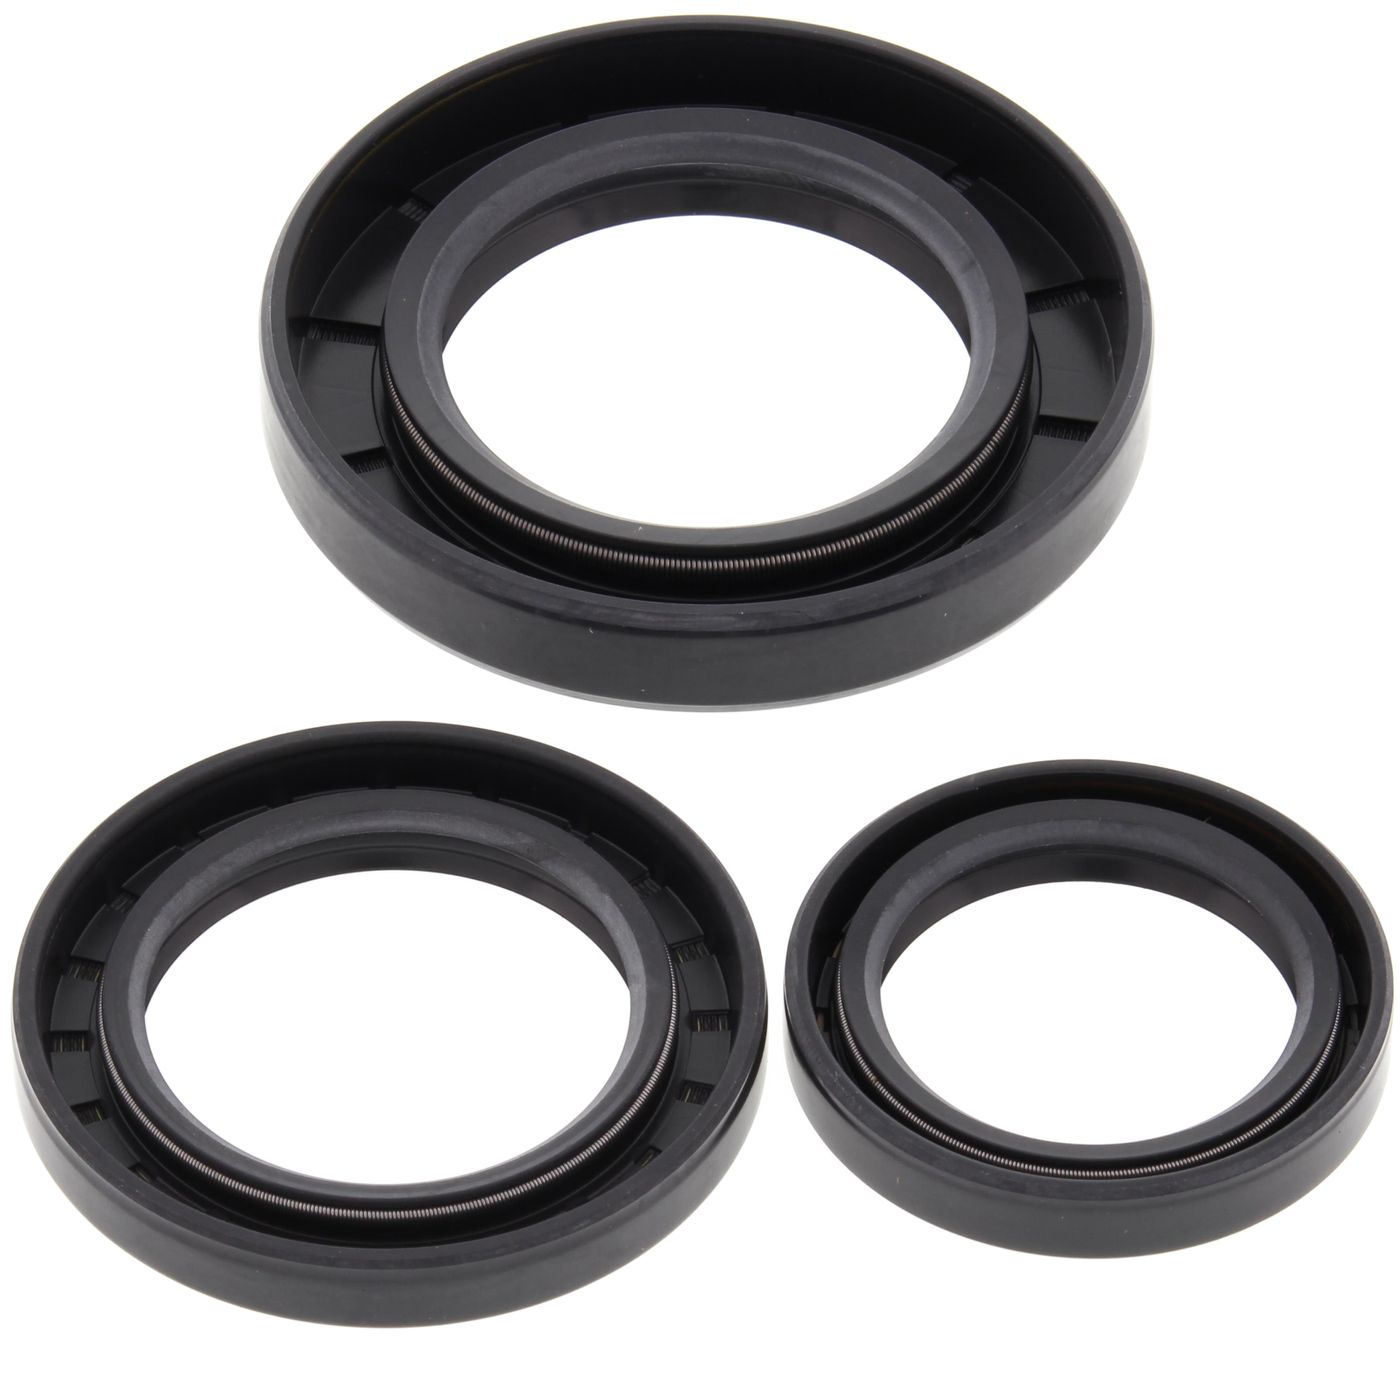 Wrp Diff Seal Kits - WRP252020-5 image